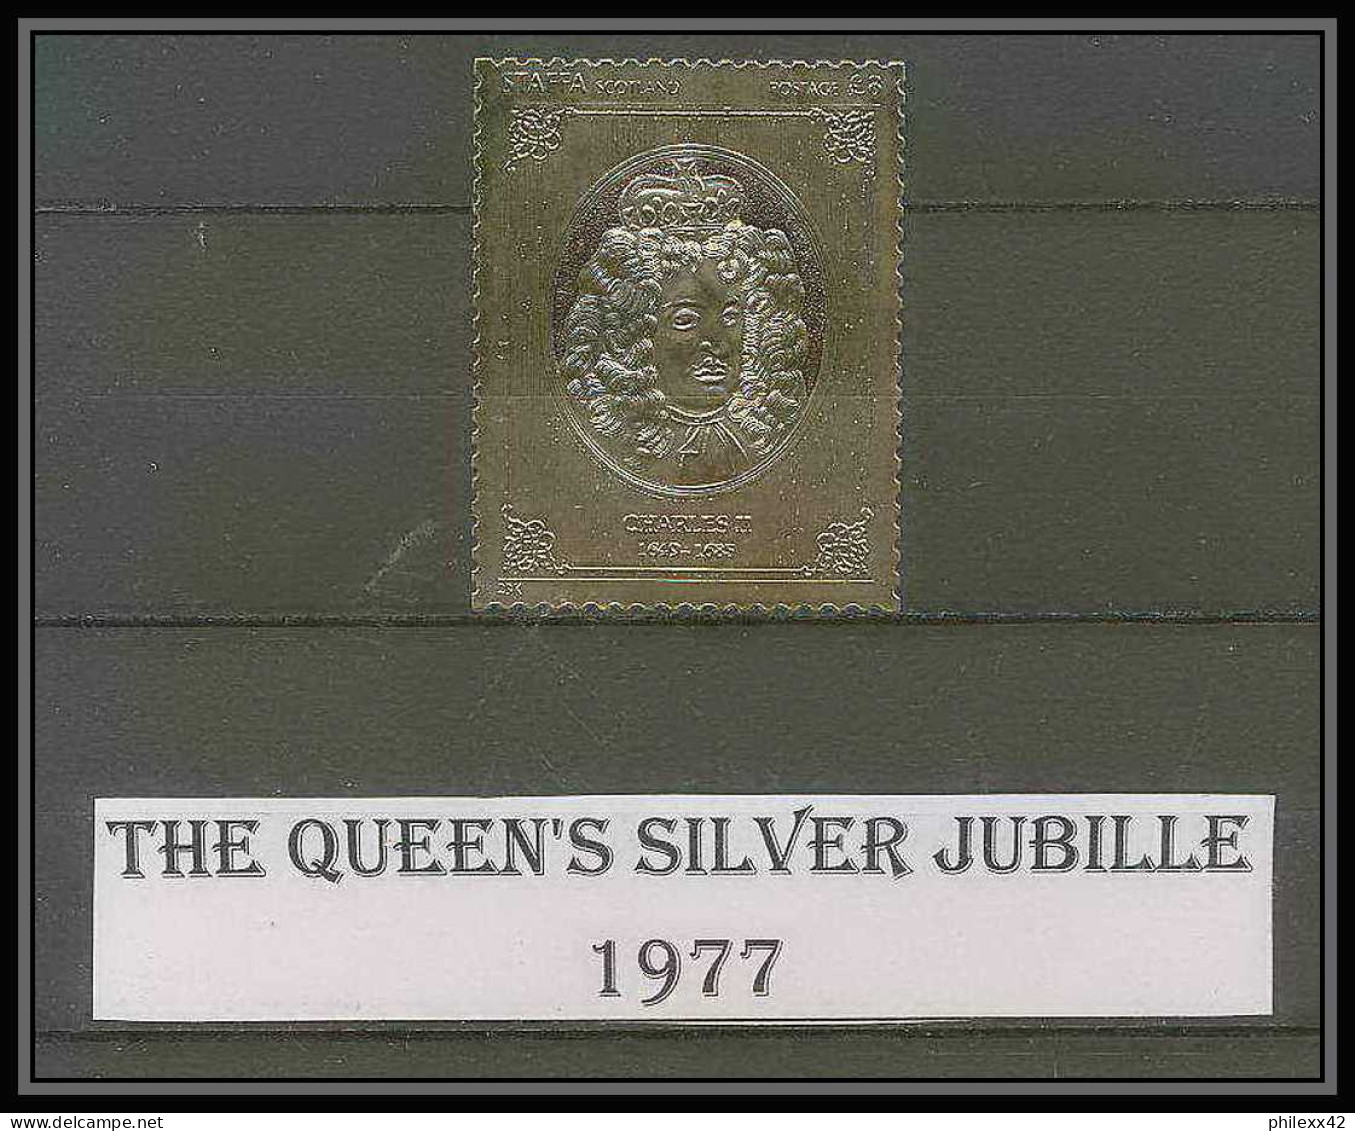 461 Staffa Scotland The Queen's Silver Jubilee 1977 OR Gold Stamps Monarchy United Kingdom Charles 2 Type 1 Neuf** Mnh - Emissione Locali